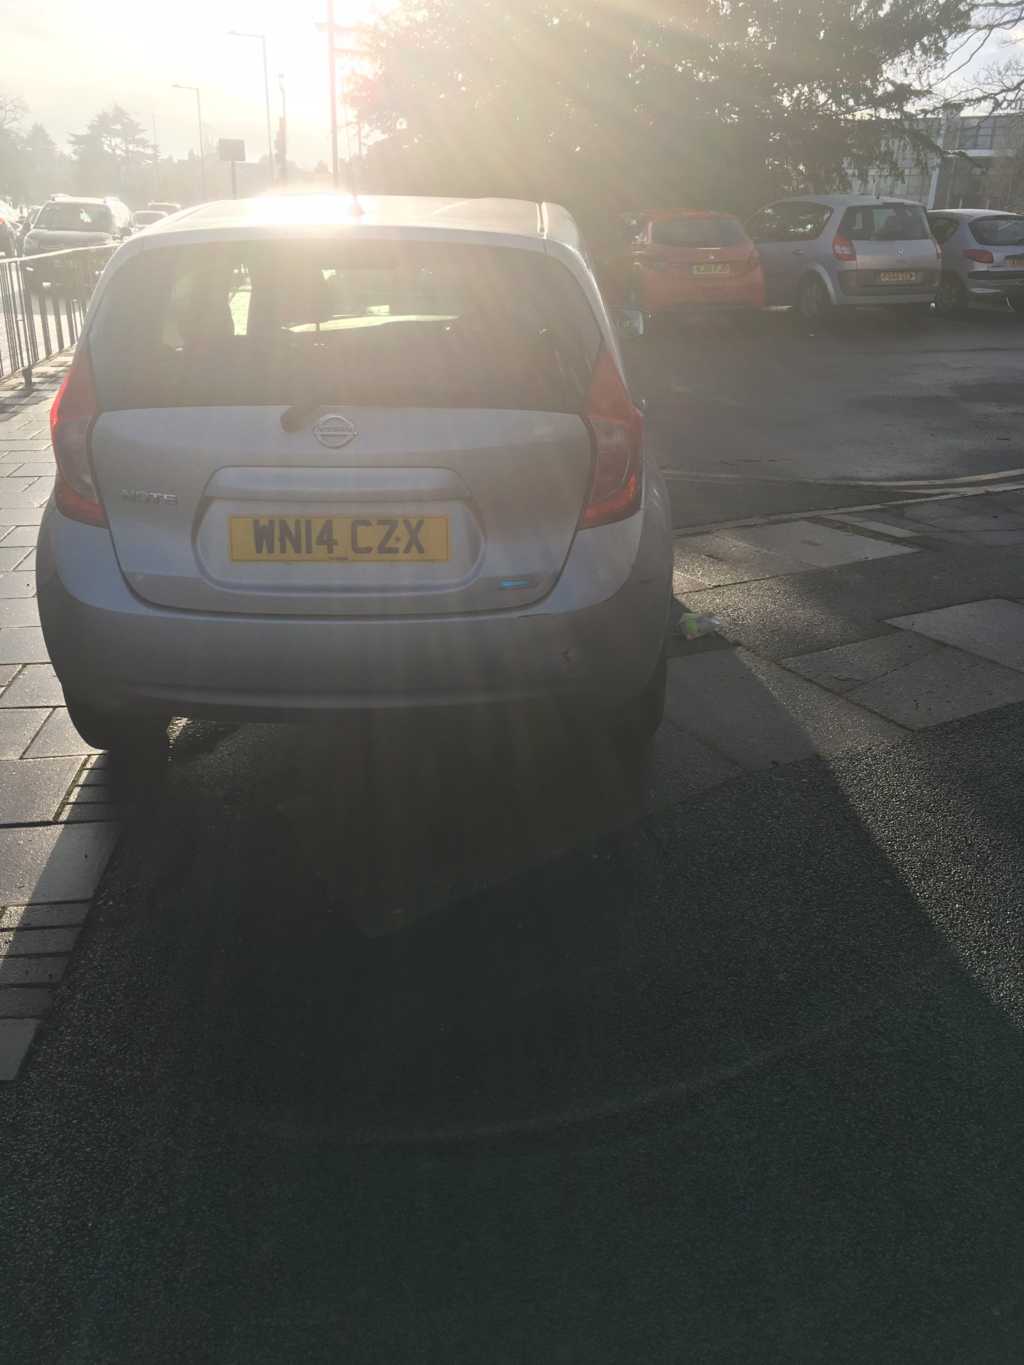 WN14 CZX displaying Inconsiderate Parking